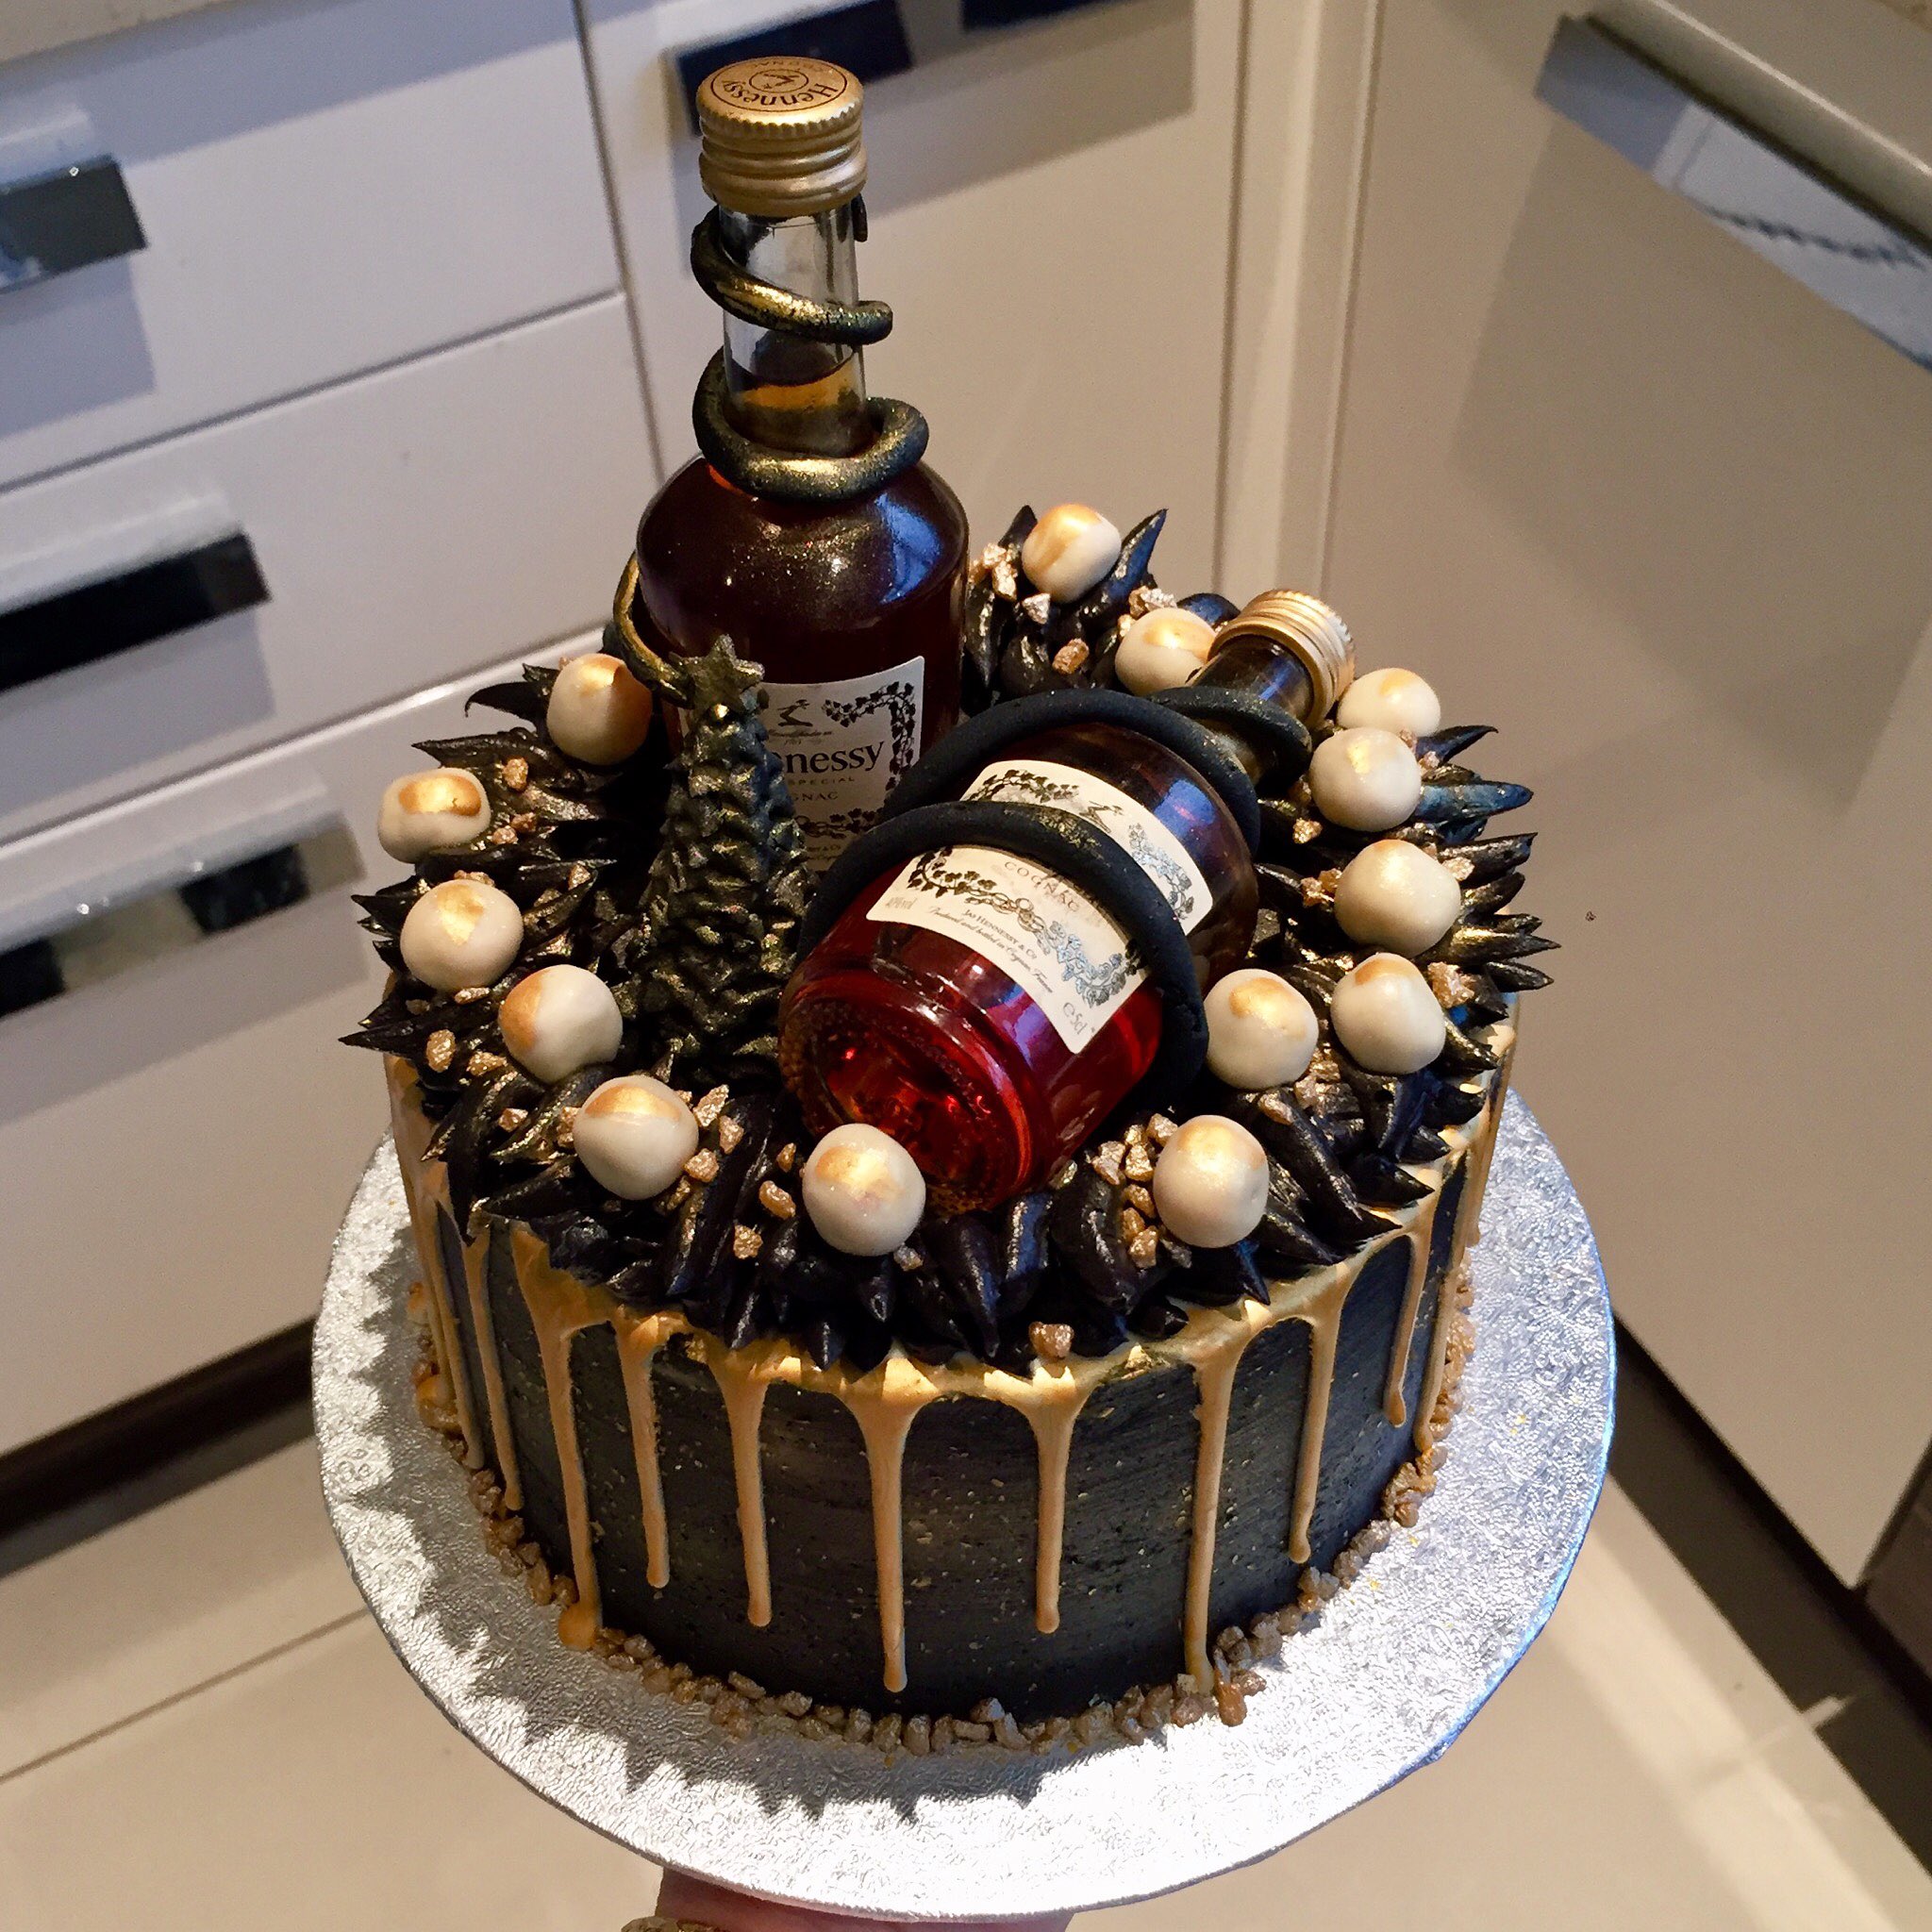 Pashmk Black And Gold Hennessy Cake With My Cute Lil Sugar Paste Christmas Tree Lol T Co 2kuzt8oh3n Twitter